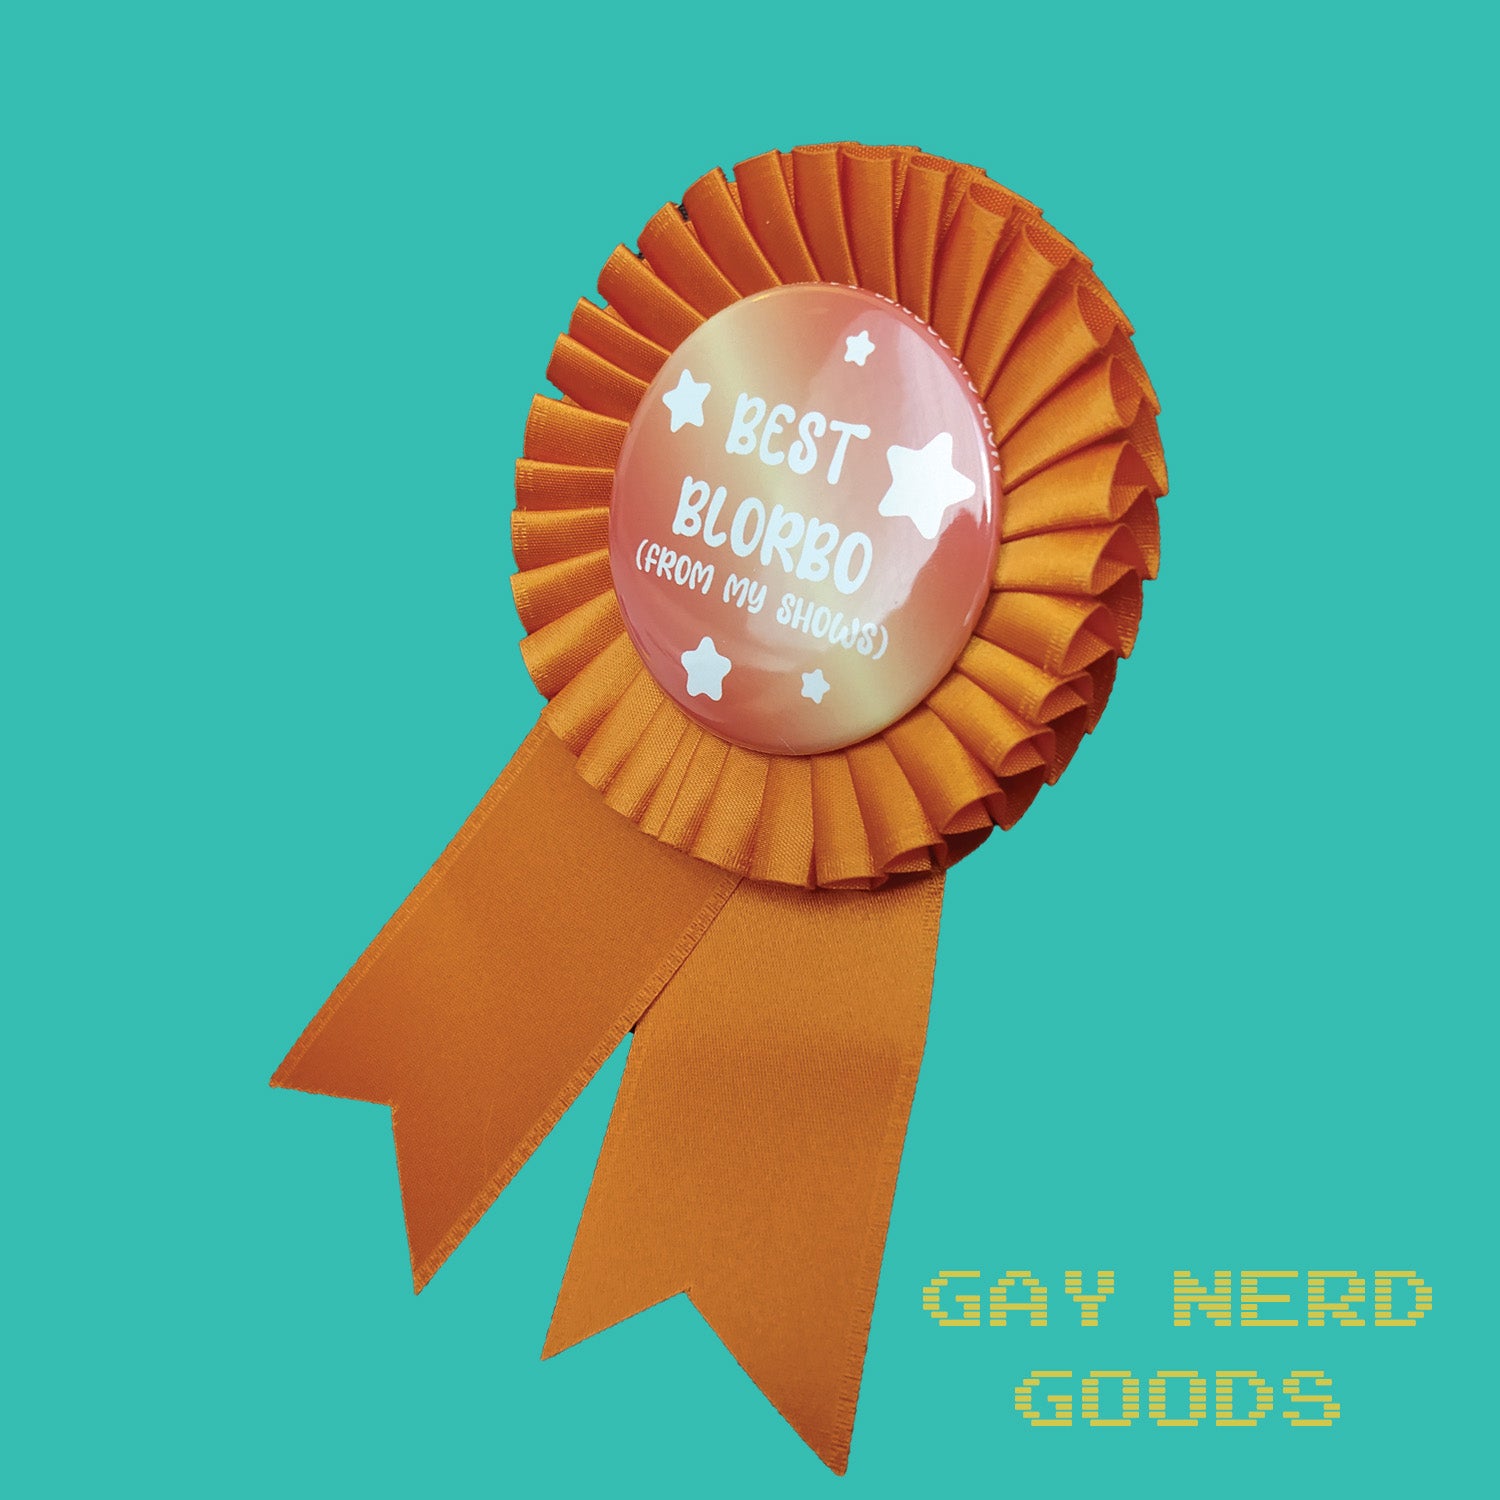 side angle view of the orange best blorbo award ribbon on a mint green background